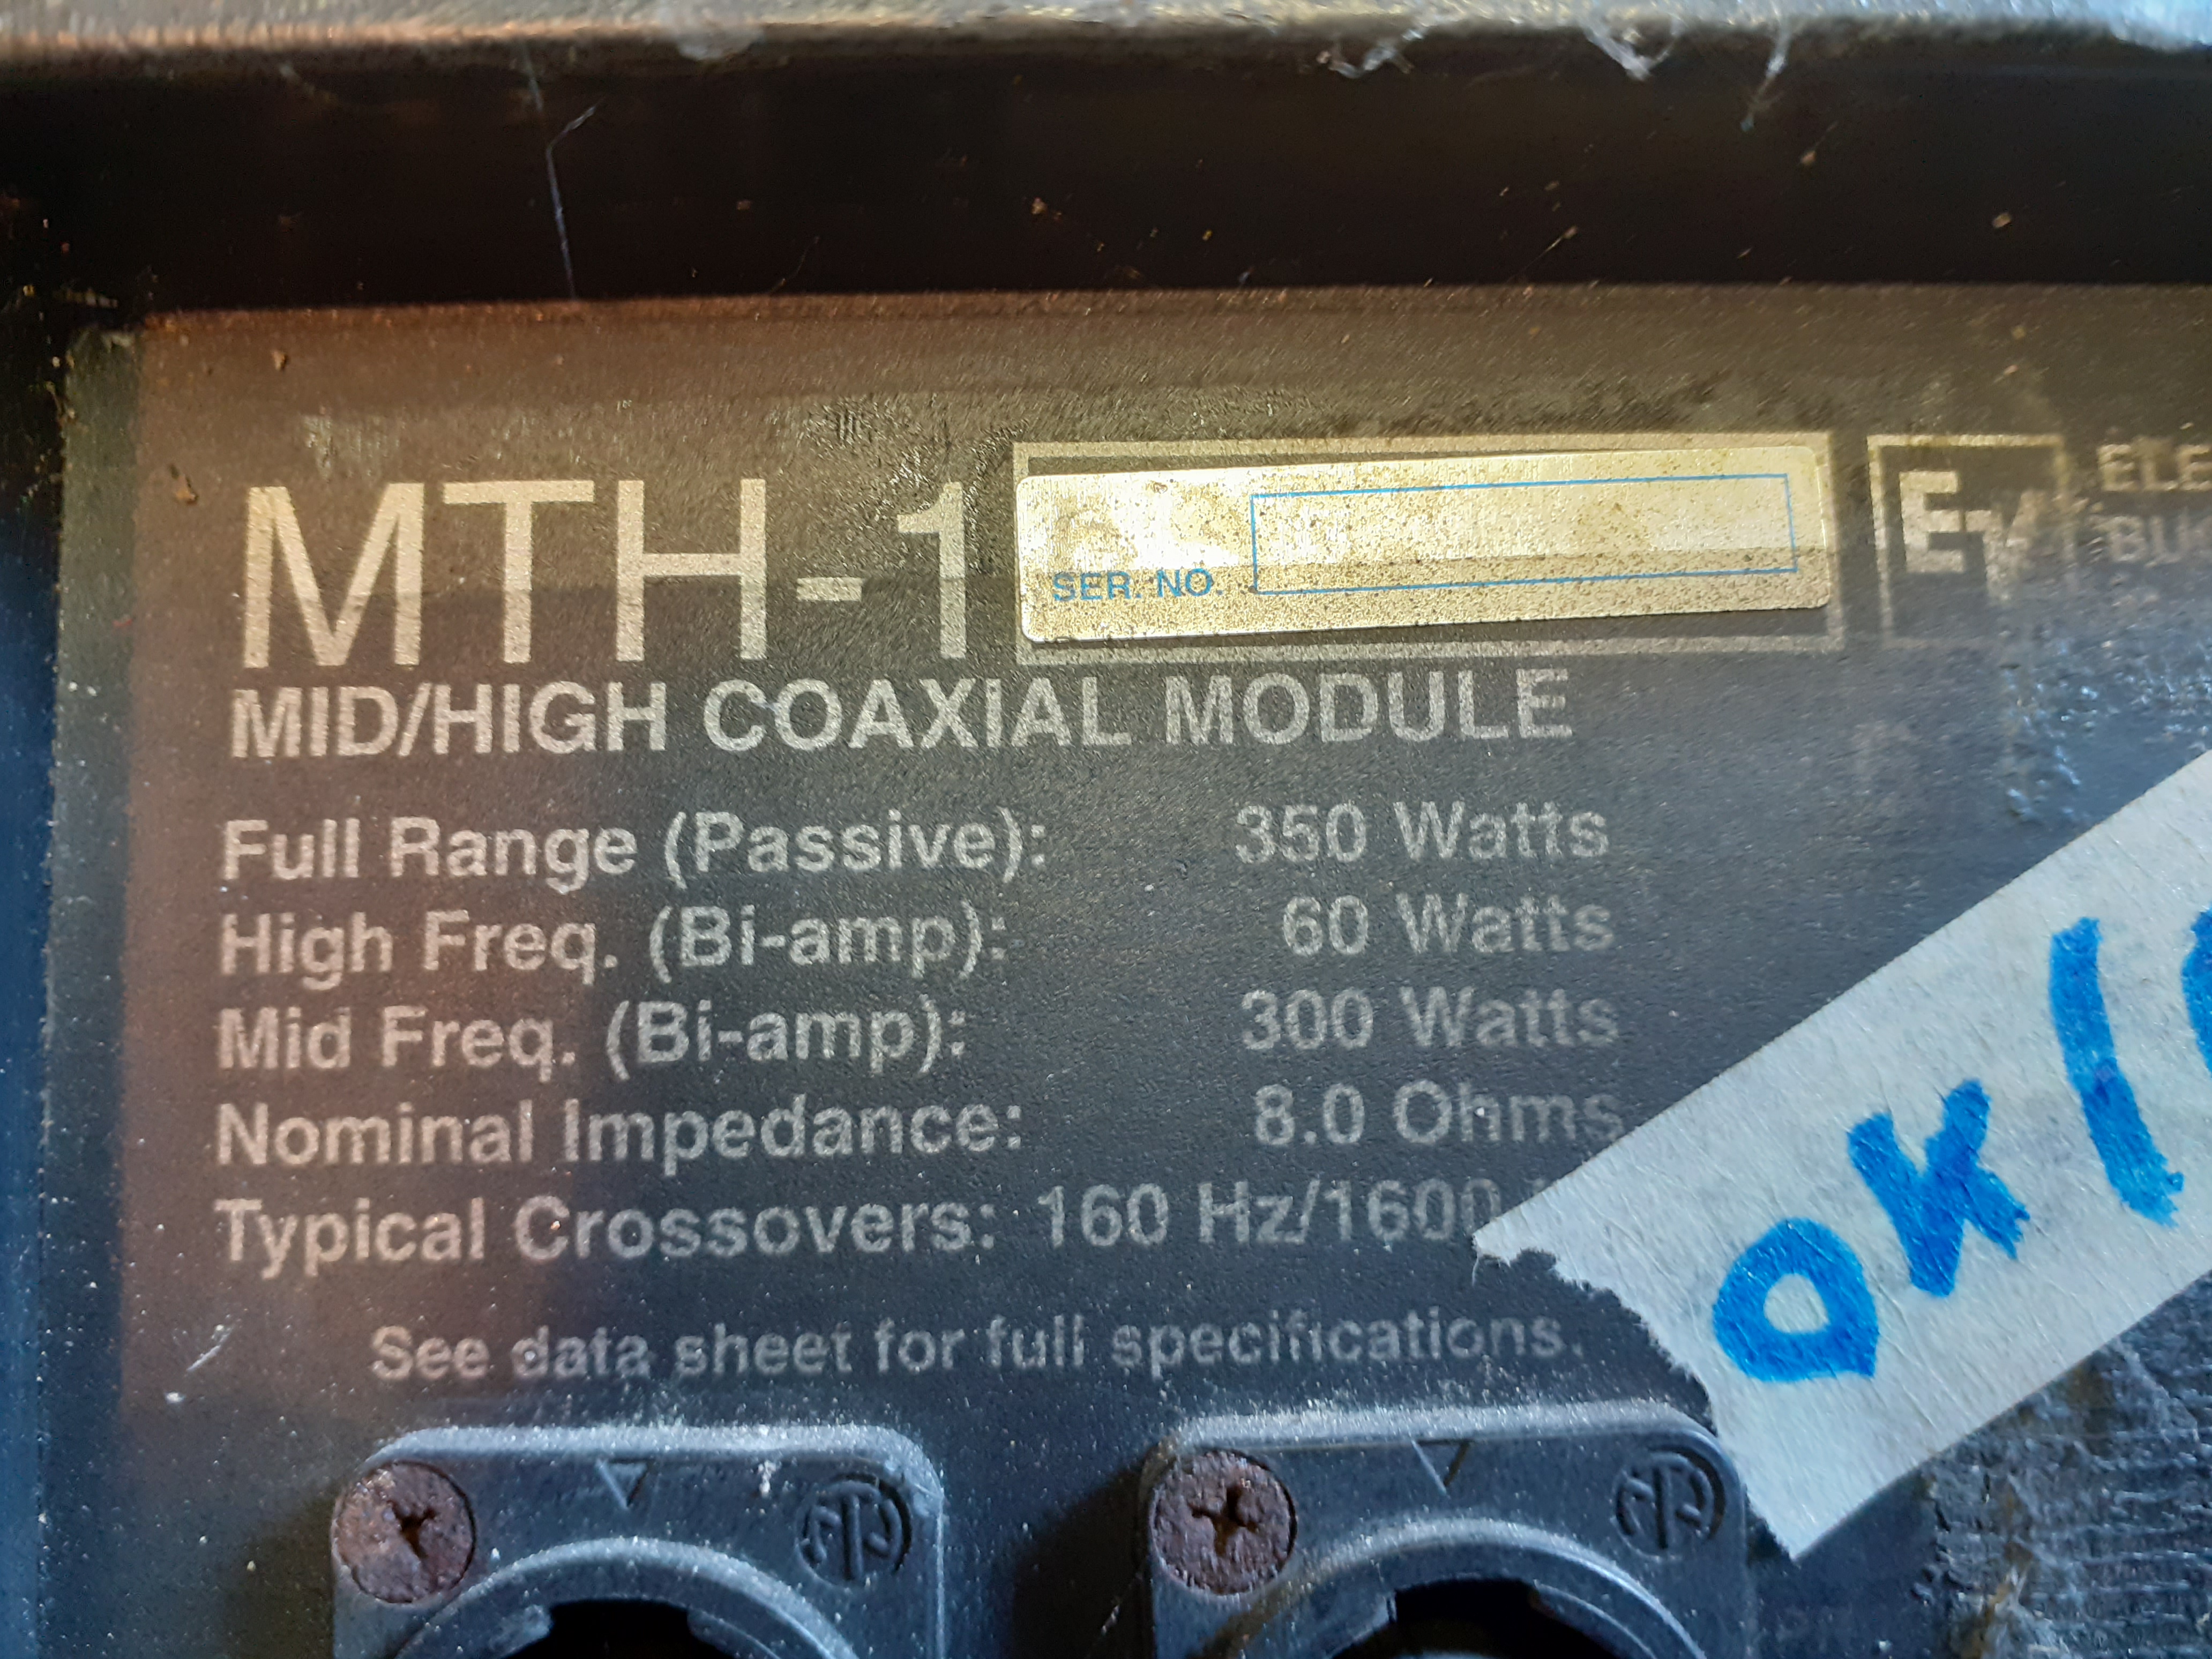 electro voice serial numbers